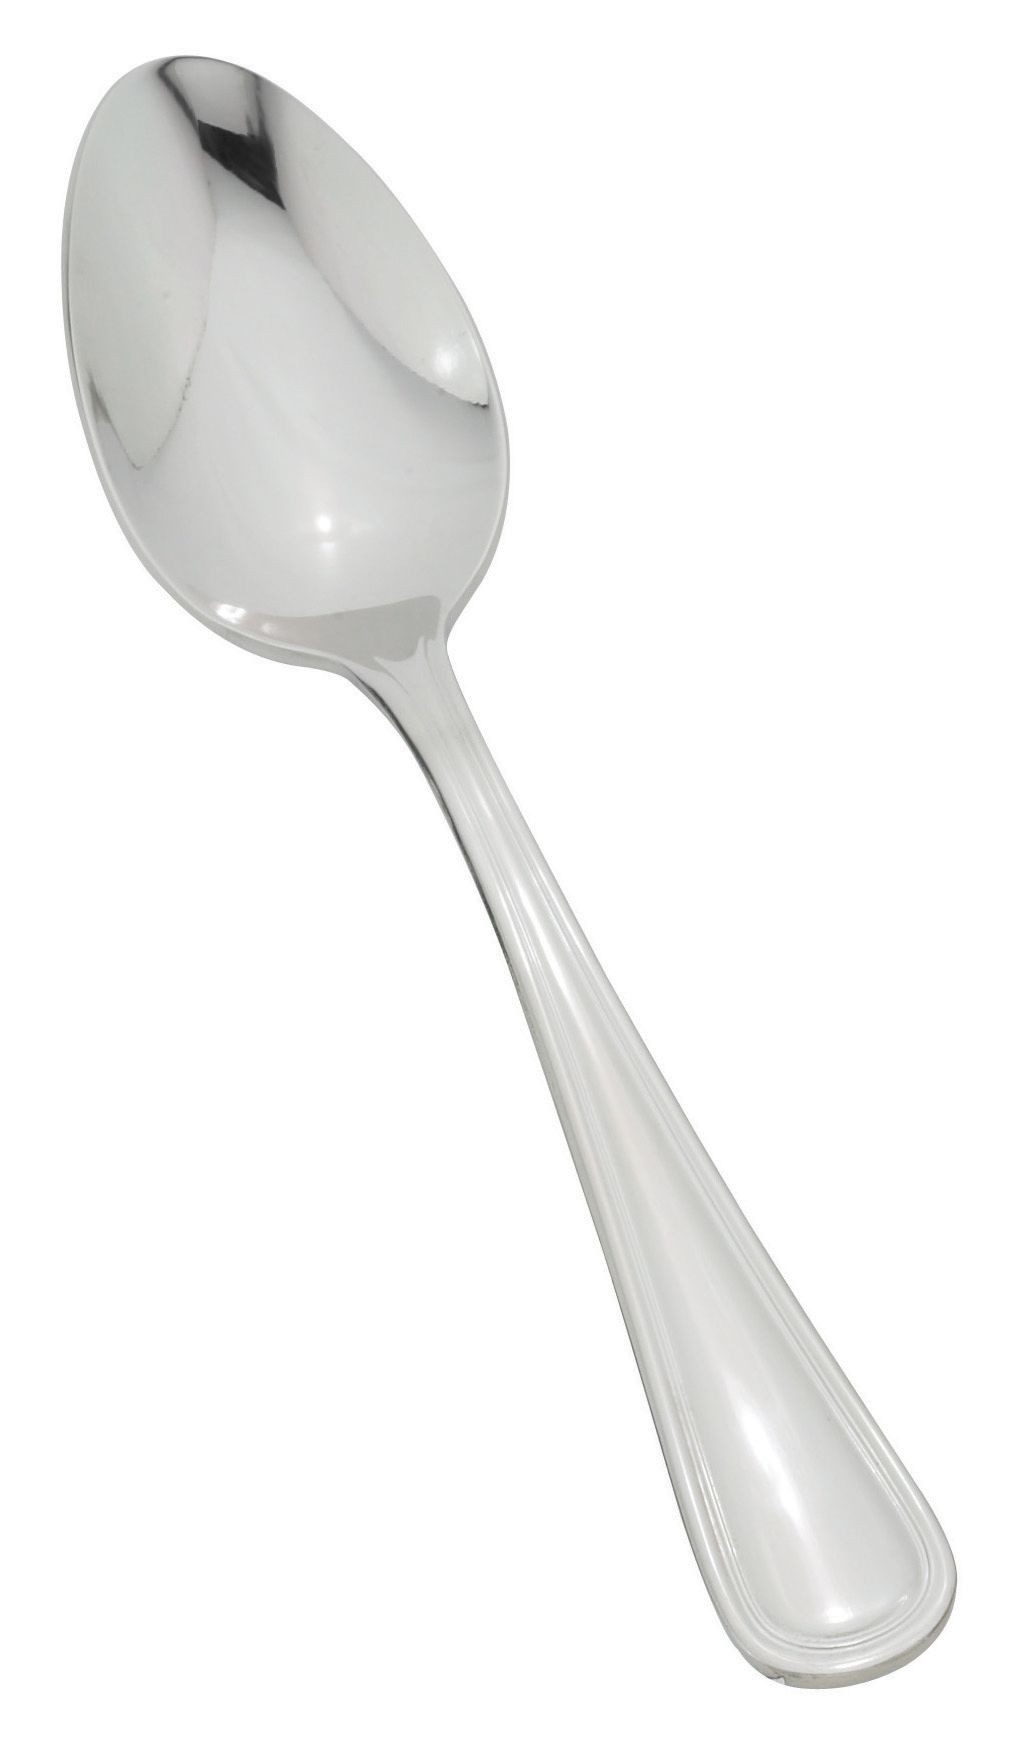 Winco 0030-21 Shangarila Extra Heavy Stainless Steel Large Bowl Serving Spoon,